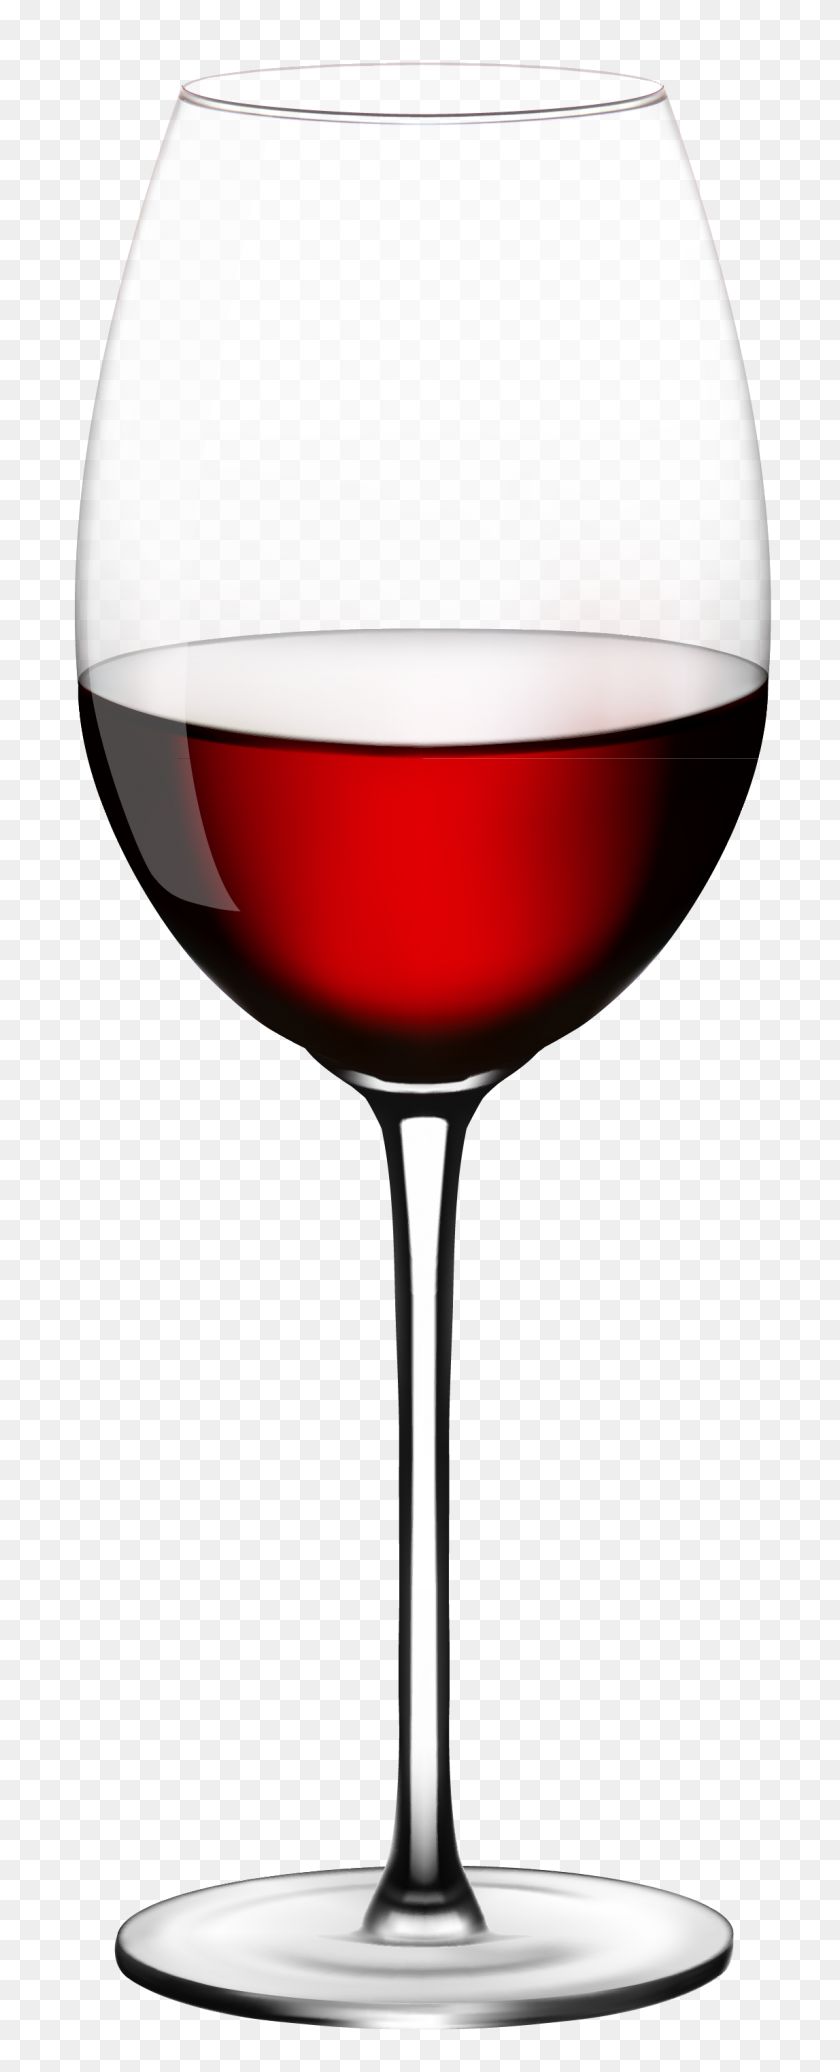 1147x2959 Wine Glass Png Vector - Free Wine Glass Clip Art